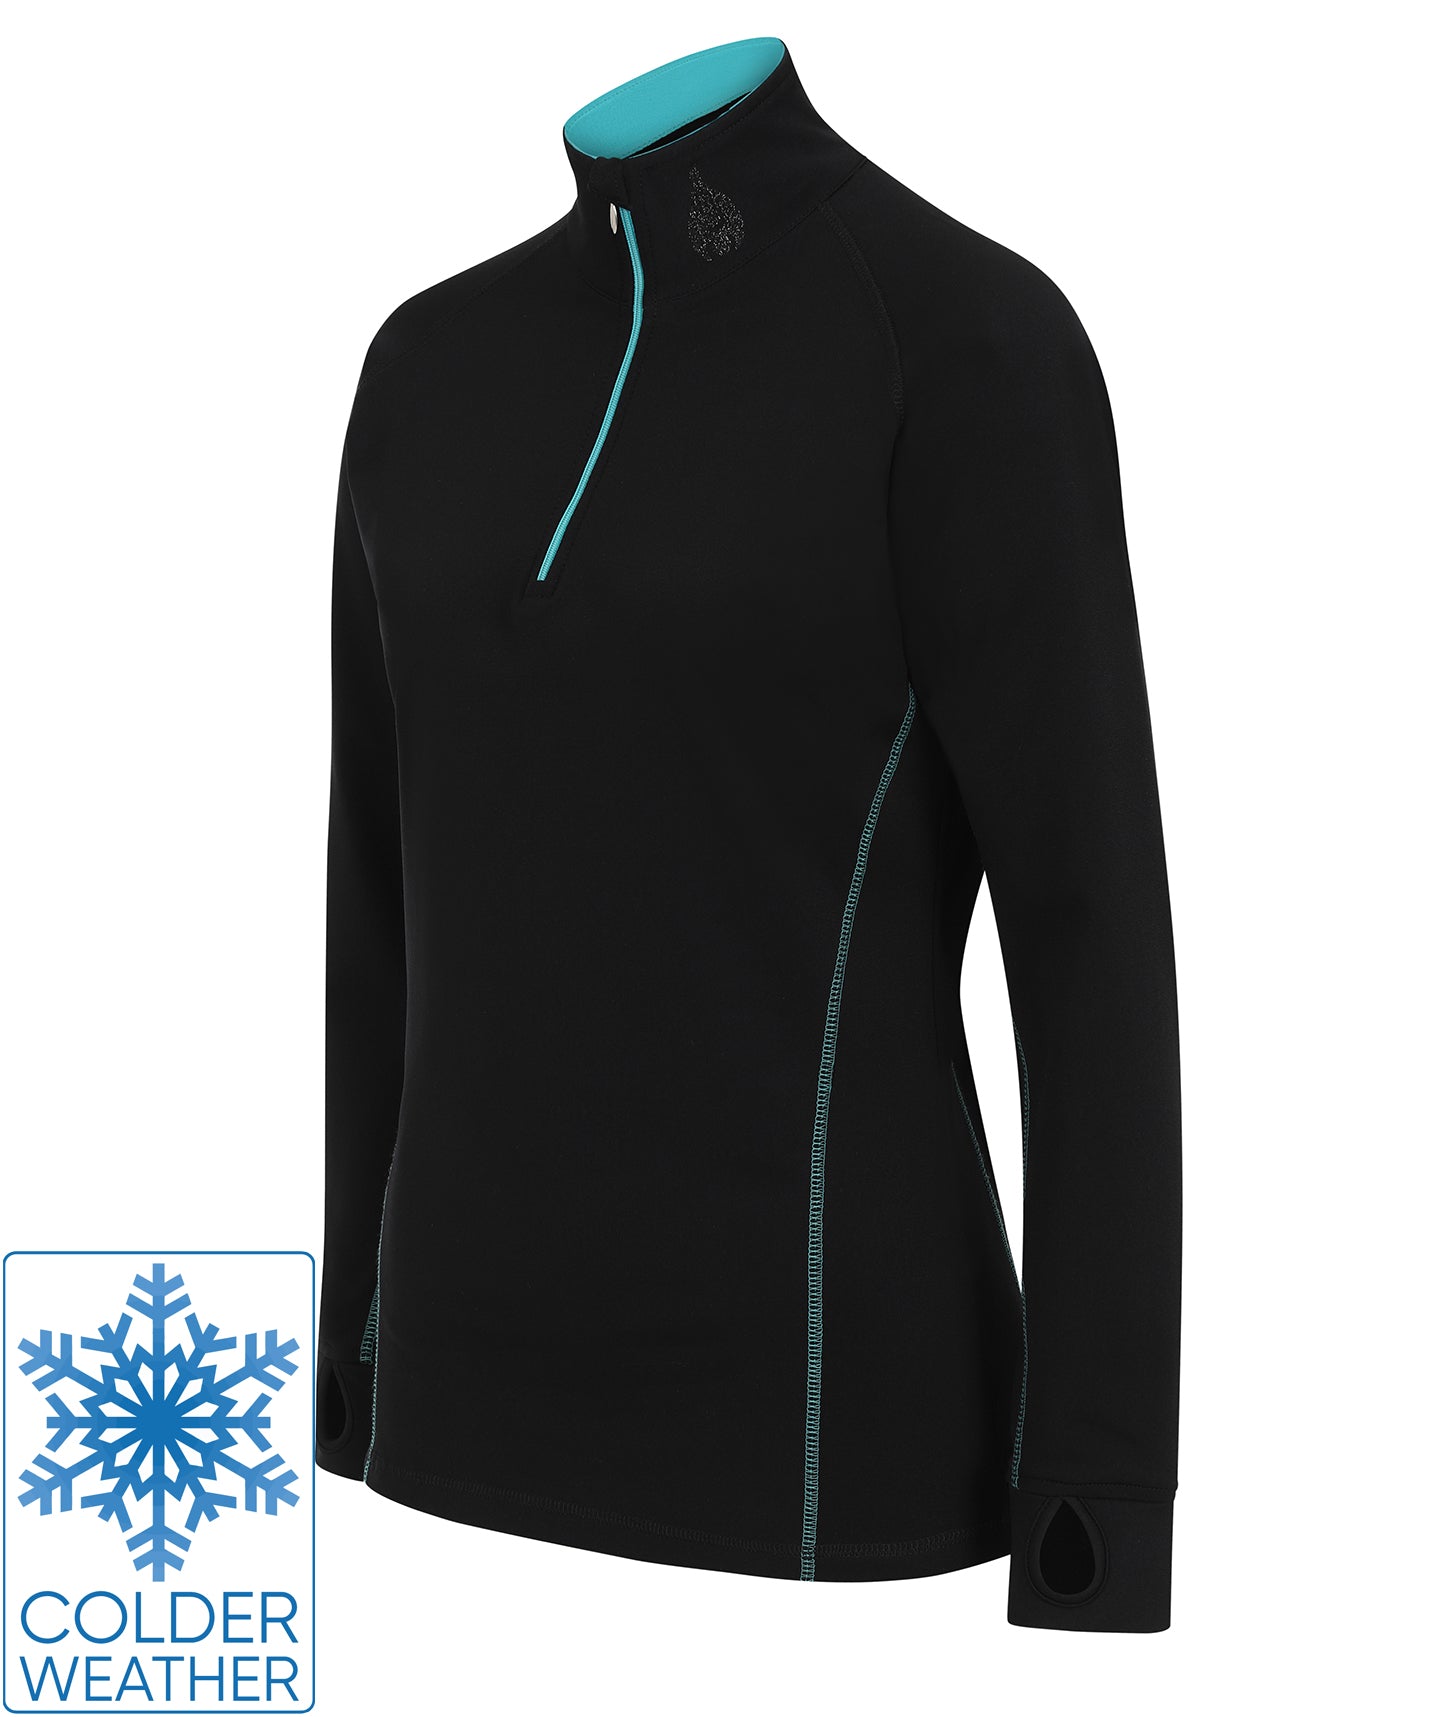 THERMO - Cool weather base layer - Black/Turquoise